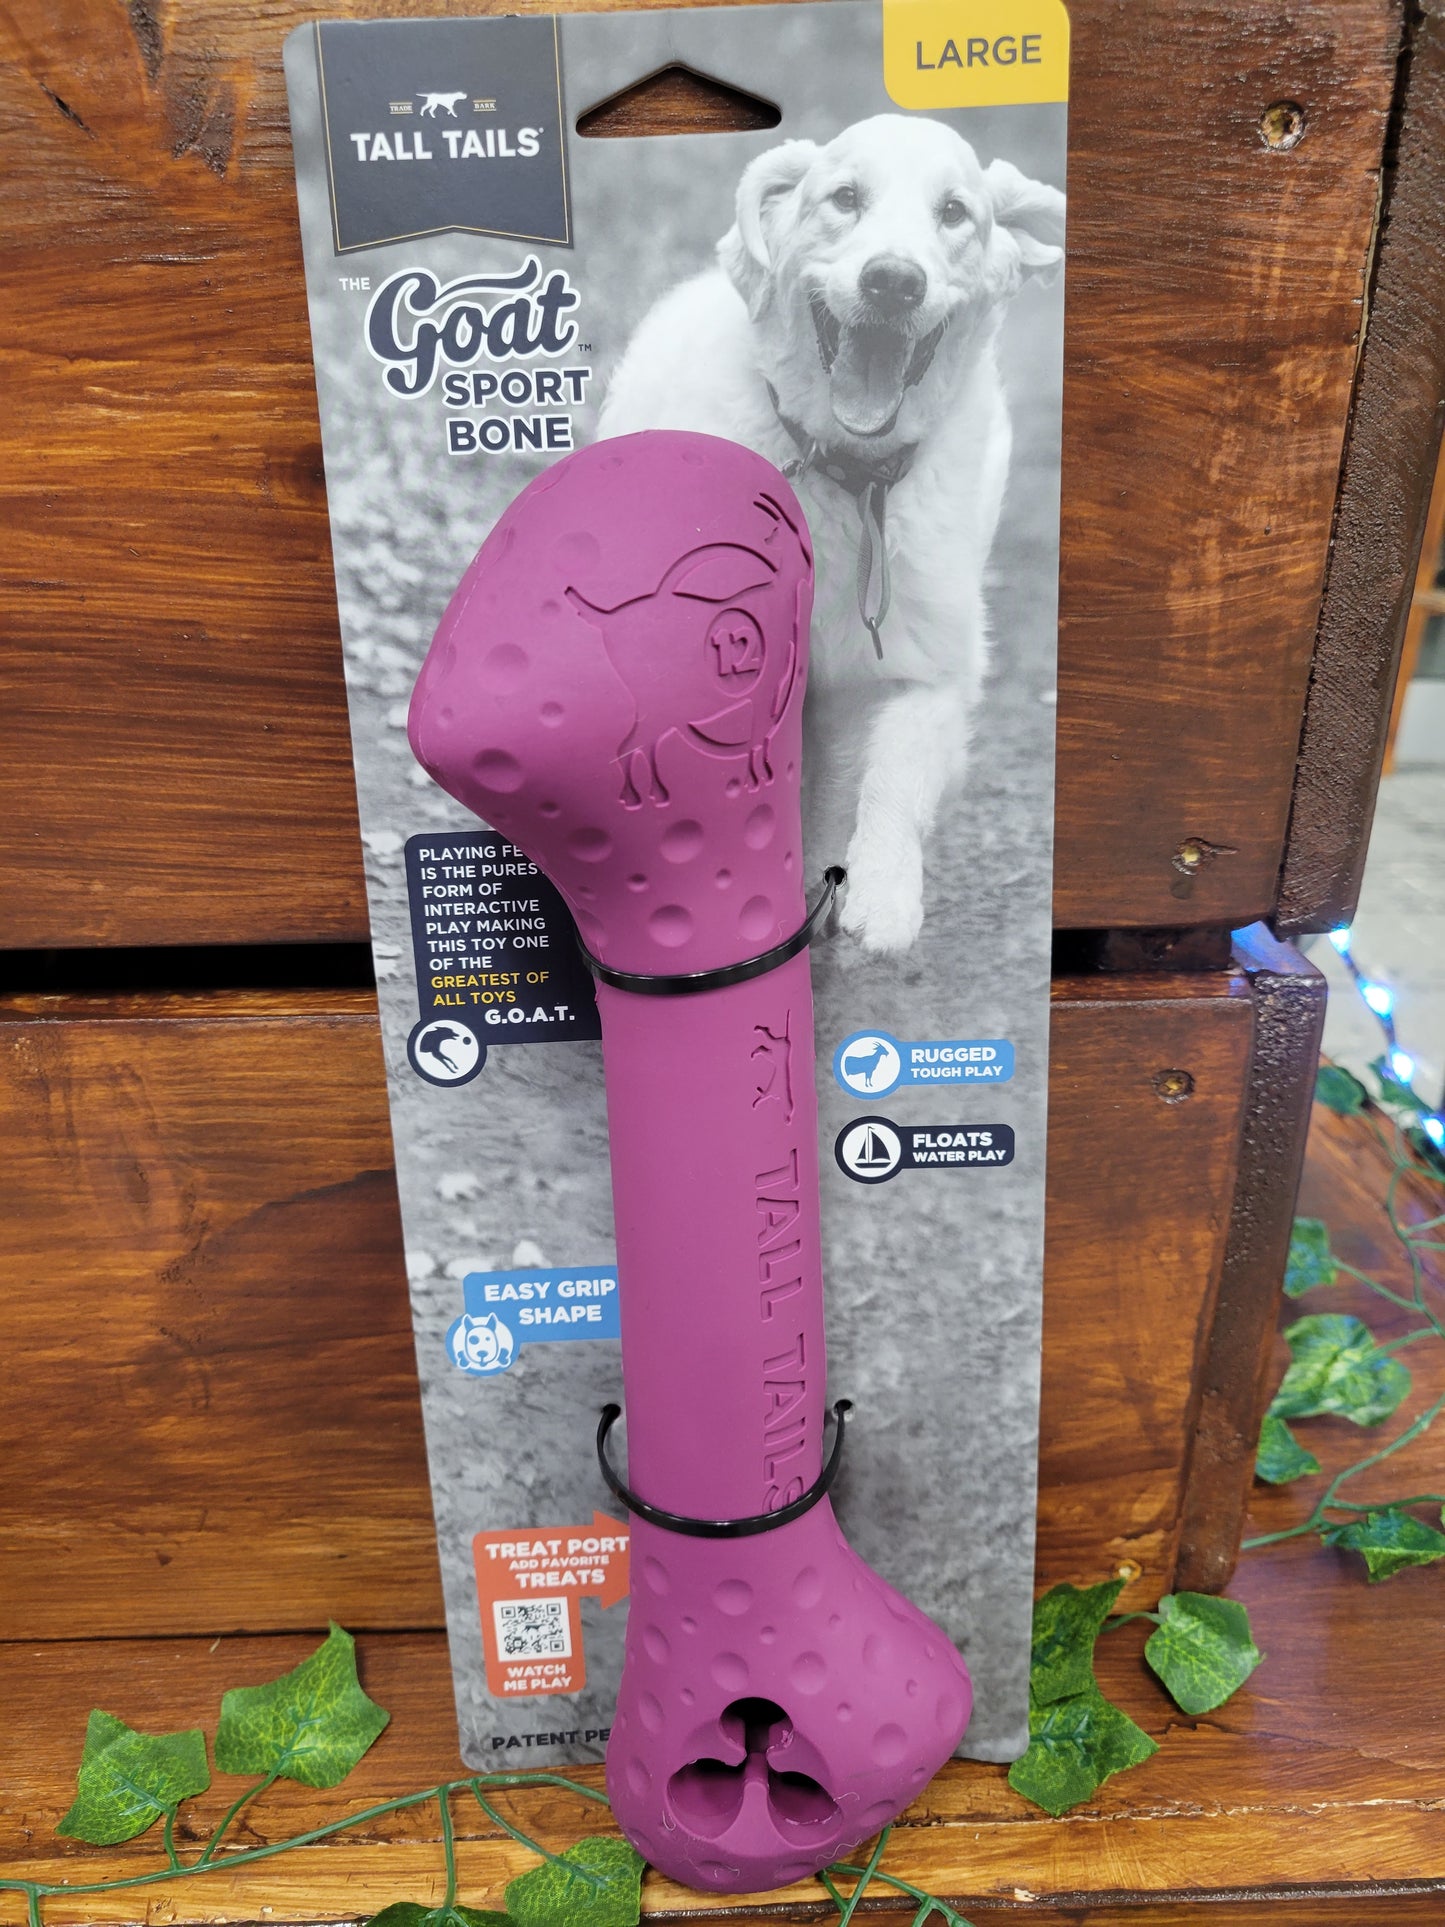 Tall Tails THE Goat SPORT BONE, Large